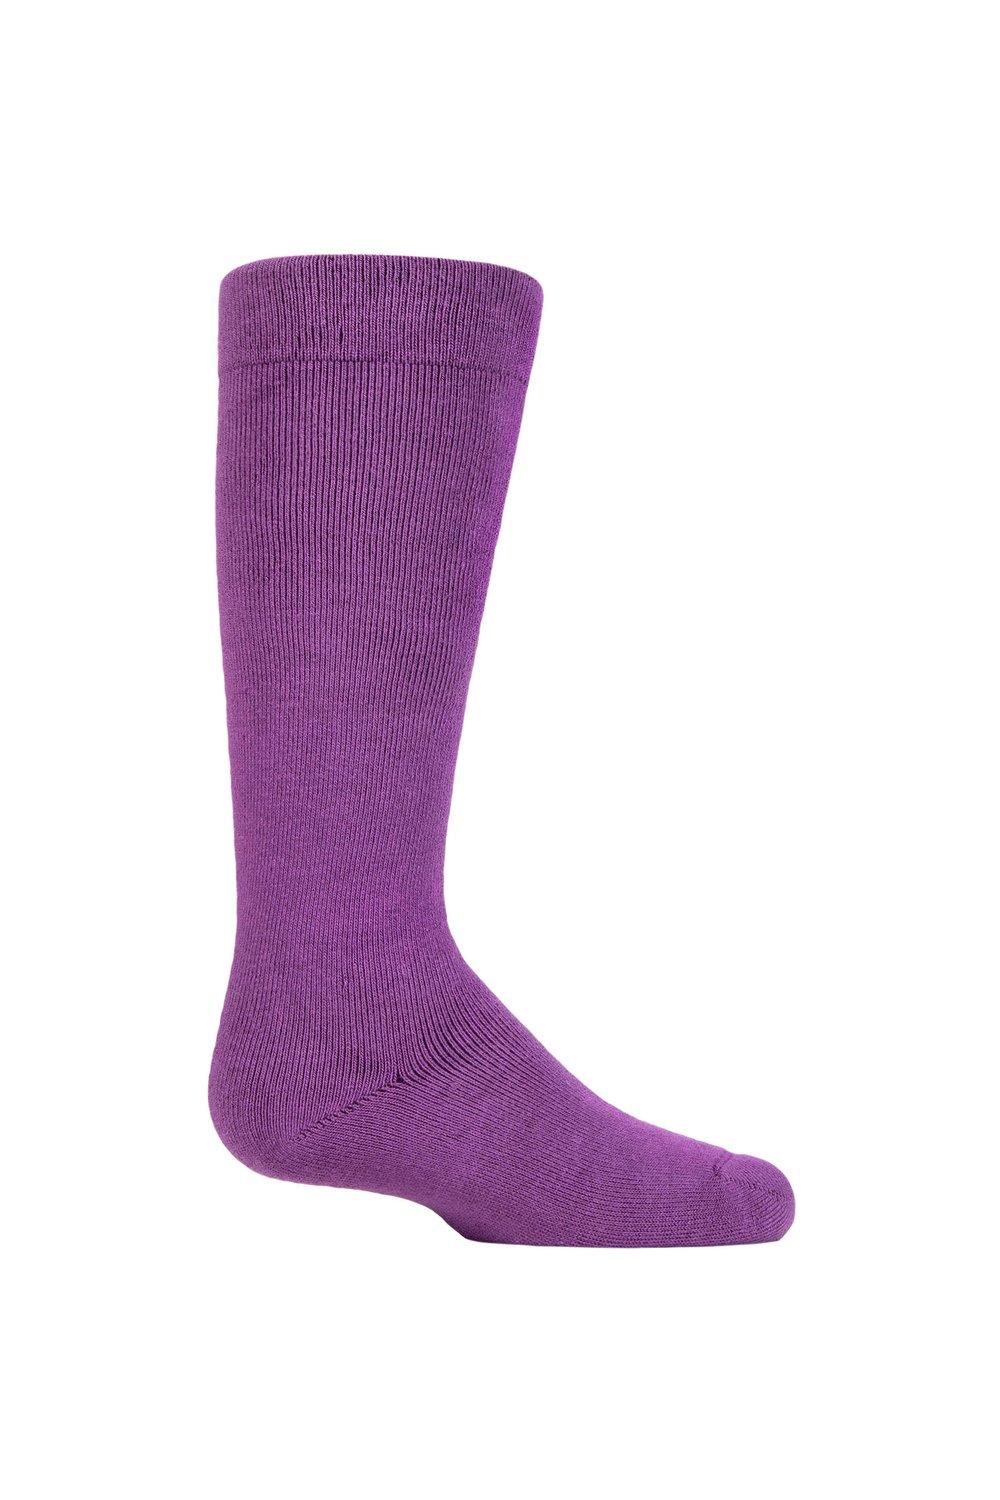 Boys and Girls 1 Pair SOCKSHOP Plain Wellyboot Full Cushion Bamboo Socks with Comfort Cuff and Smooth Toe Seams